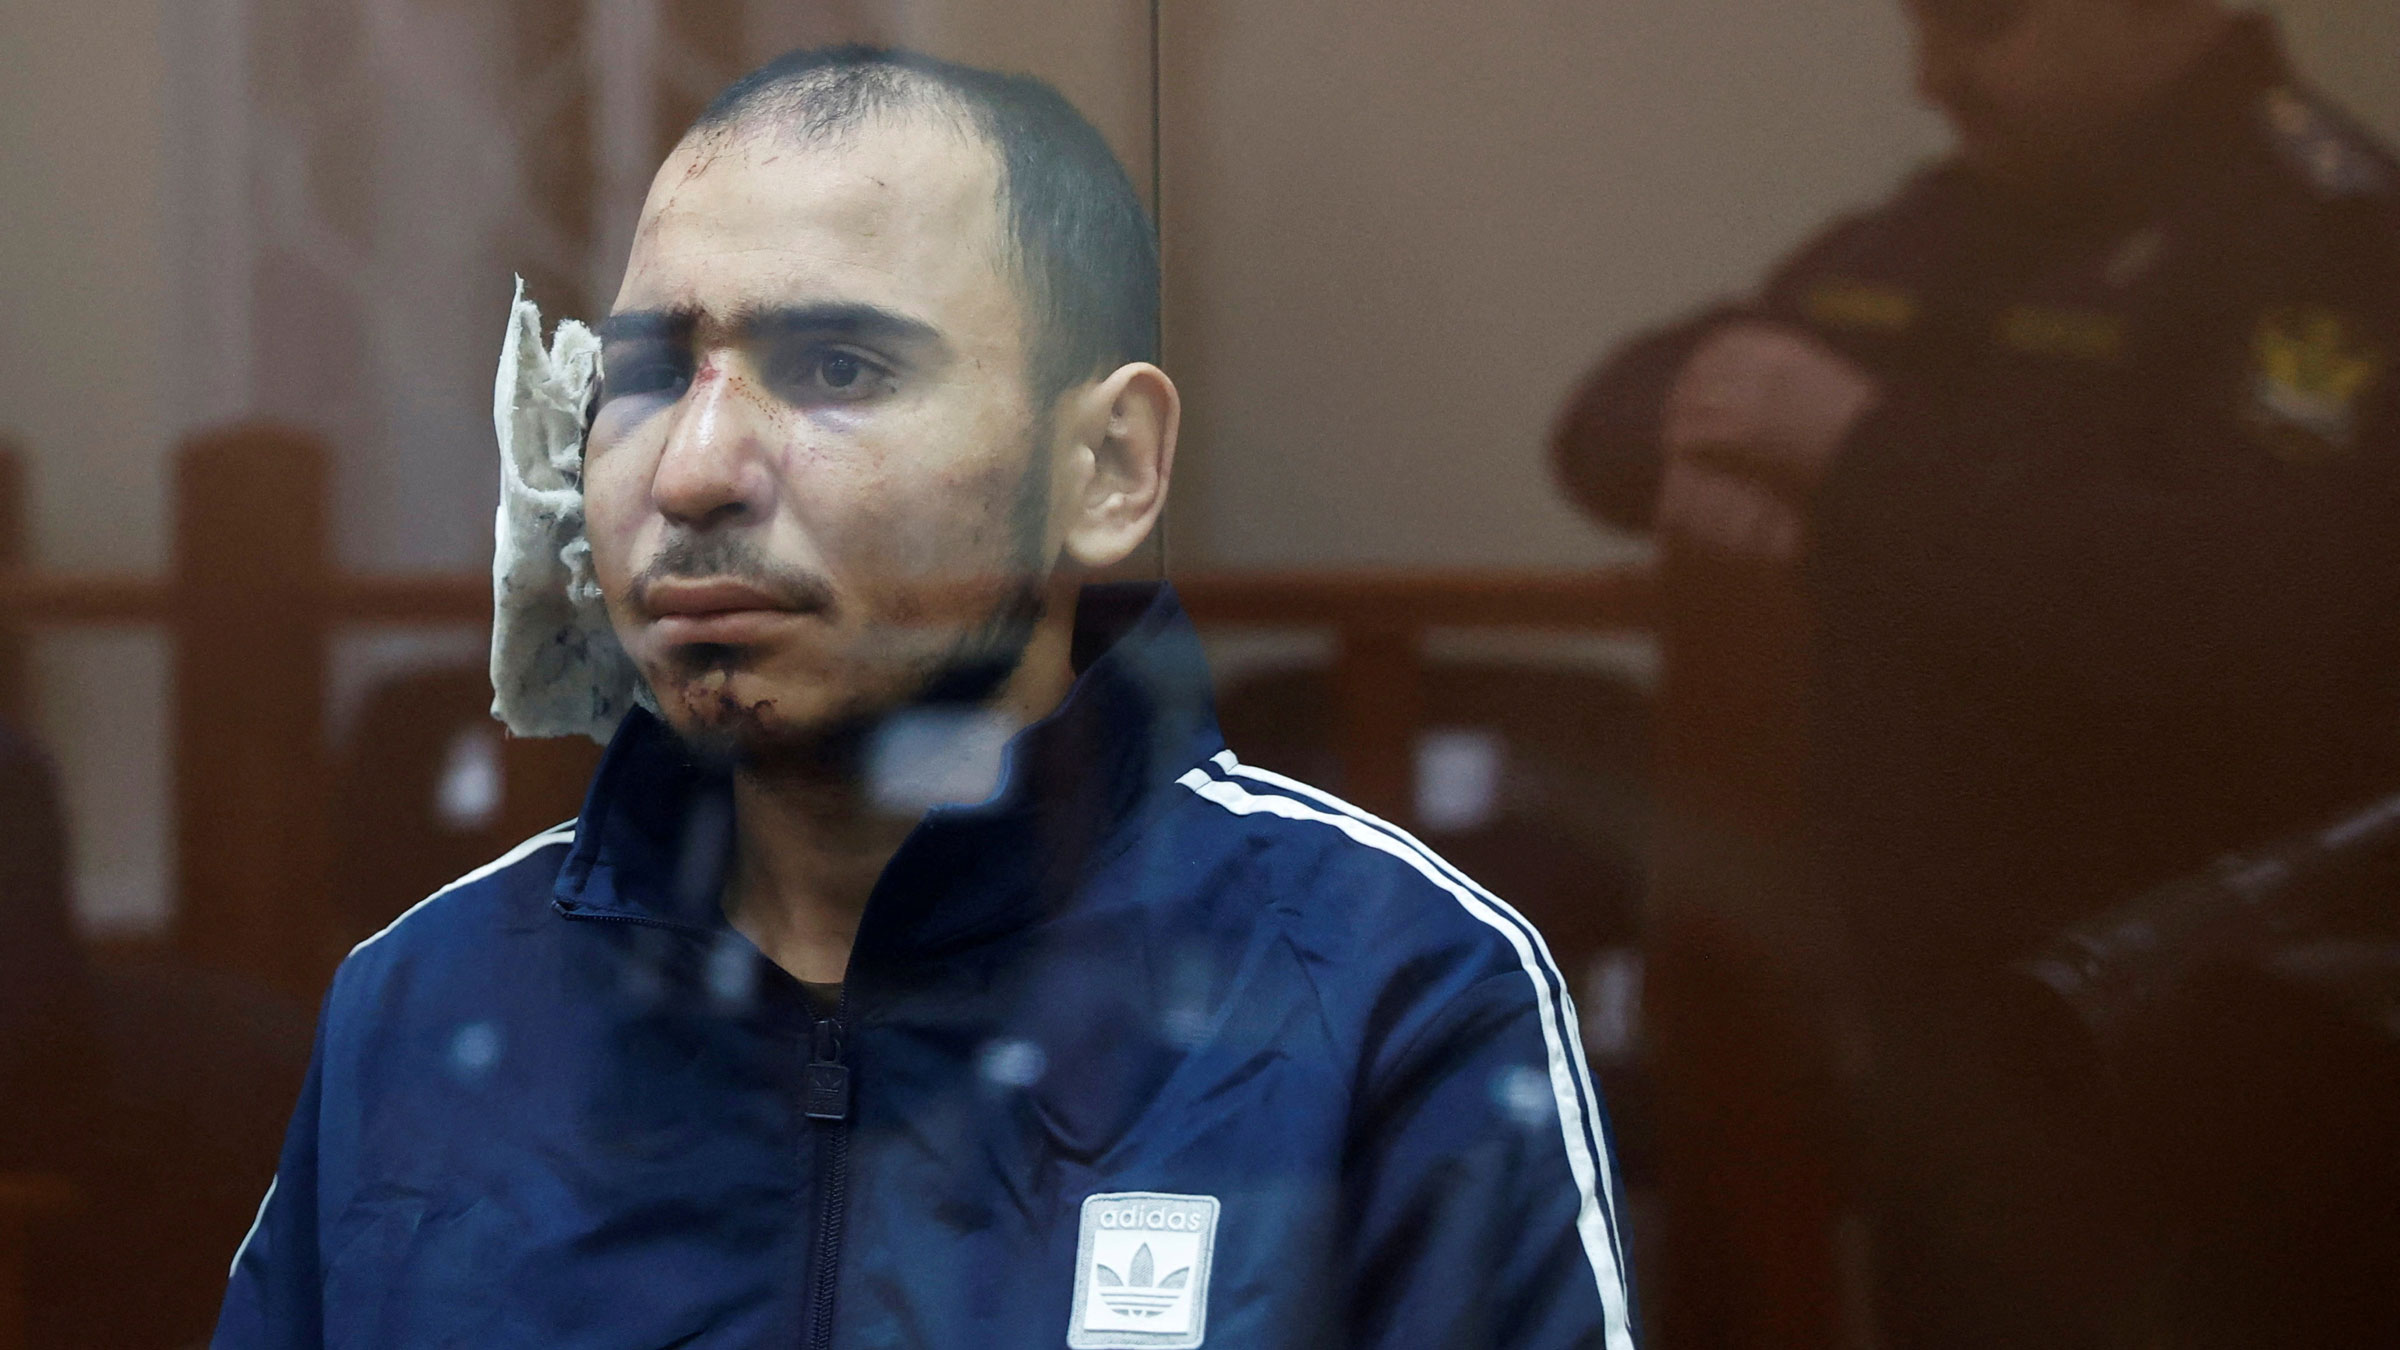 Saidakrami Rachabalizoda, a suspect in the deadly terrorist attack in Moscow, sits behind a glass wall of an enclosure during a court appearance on Sunday. His ear was heavily bandaged.